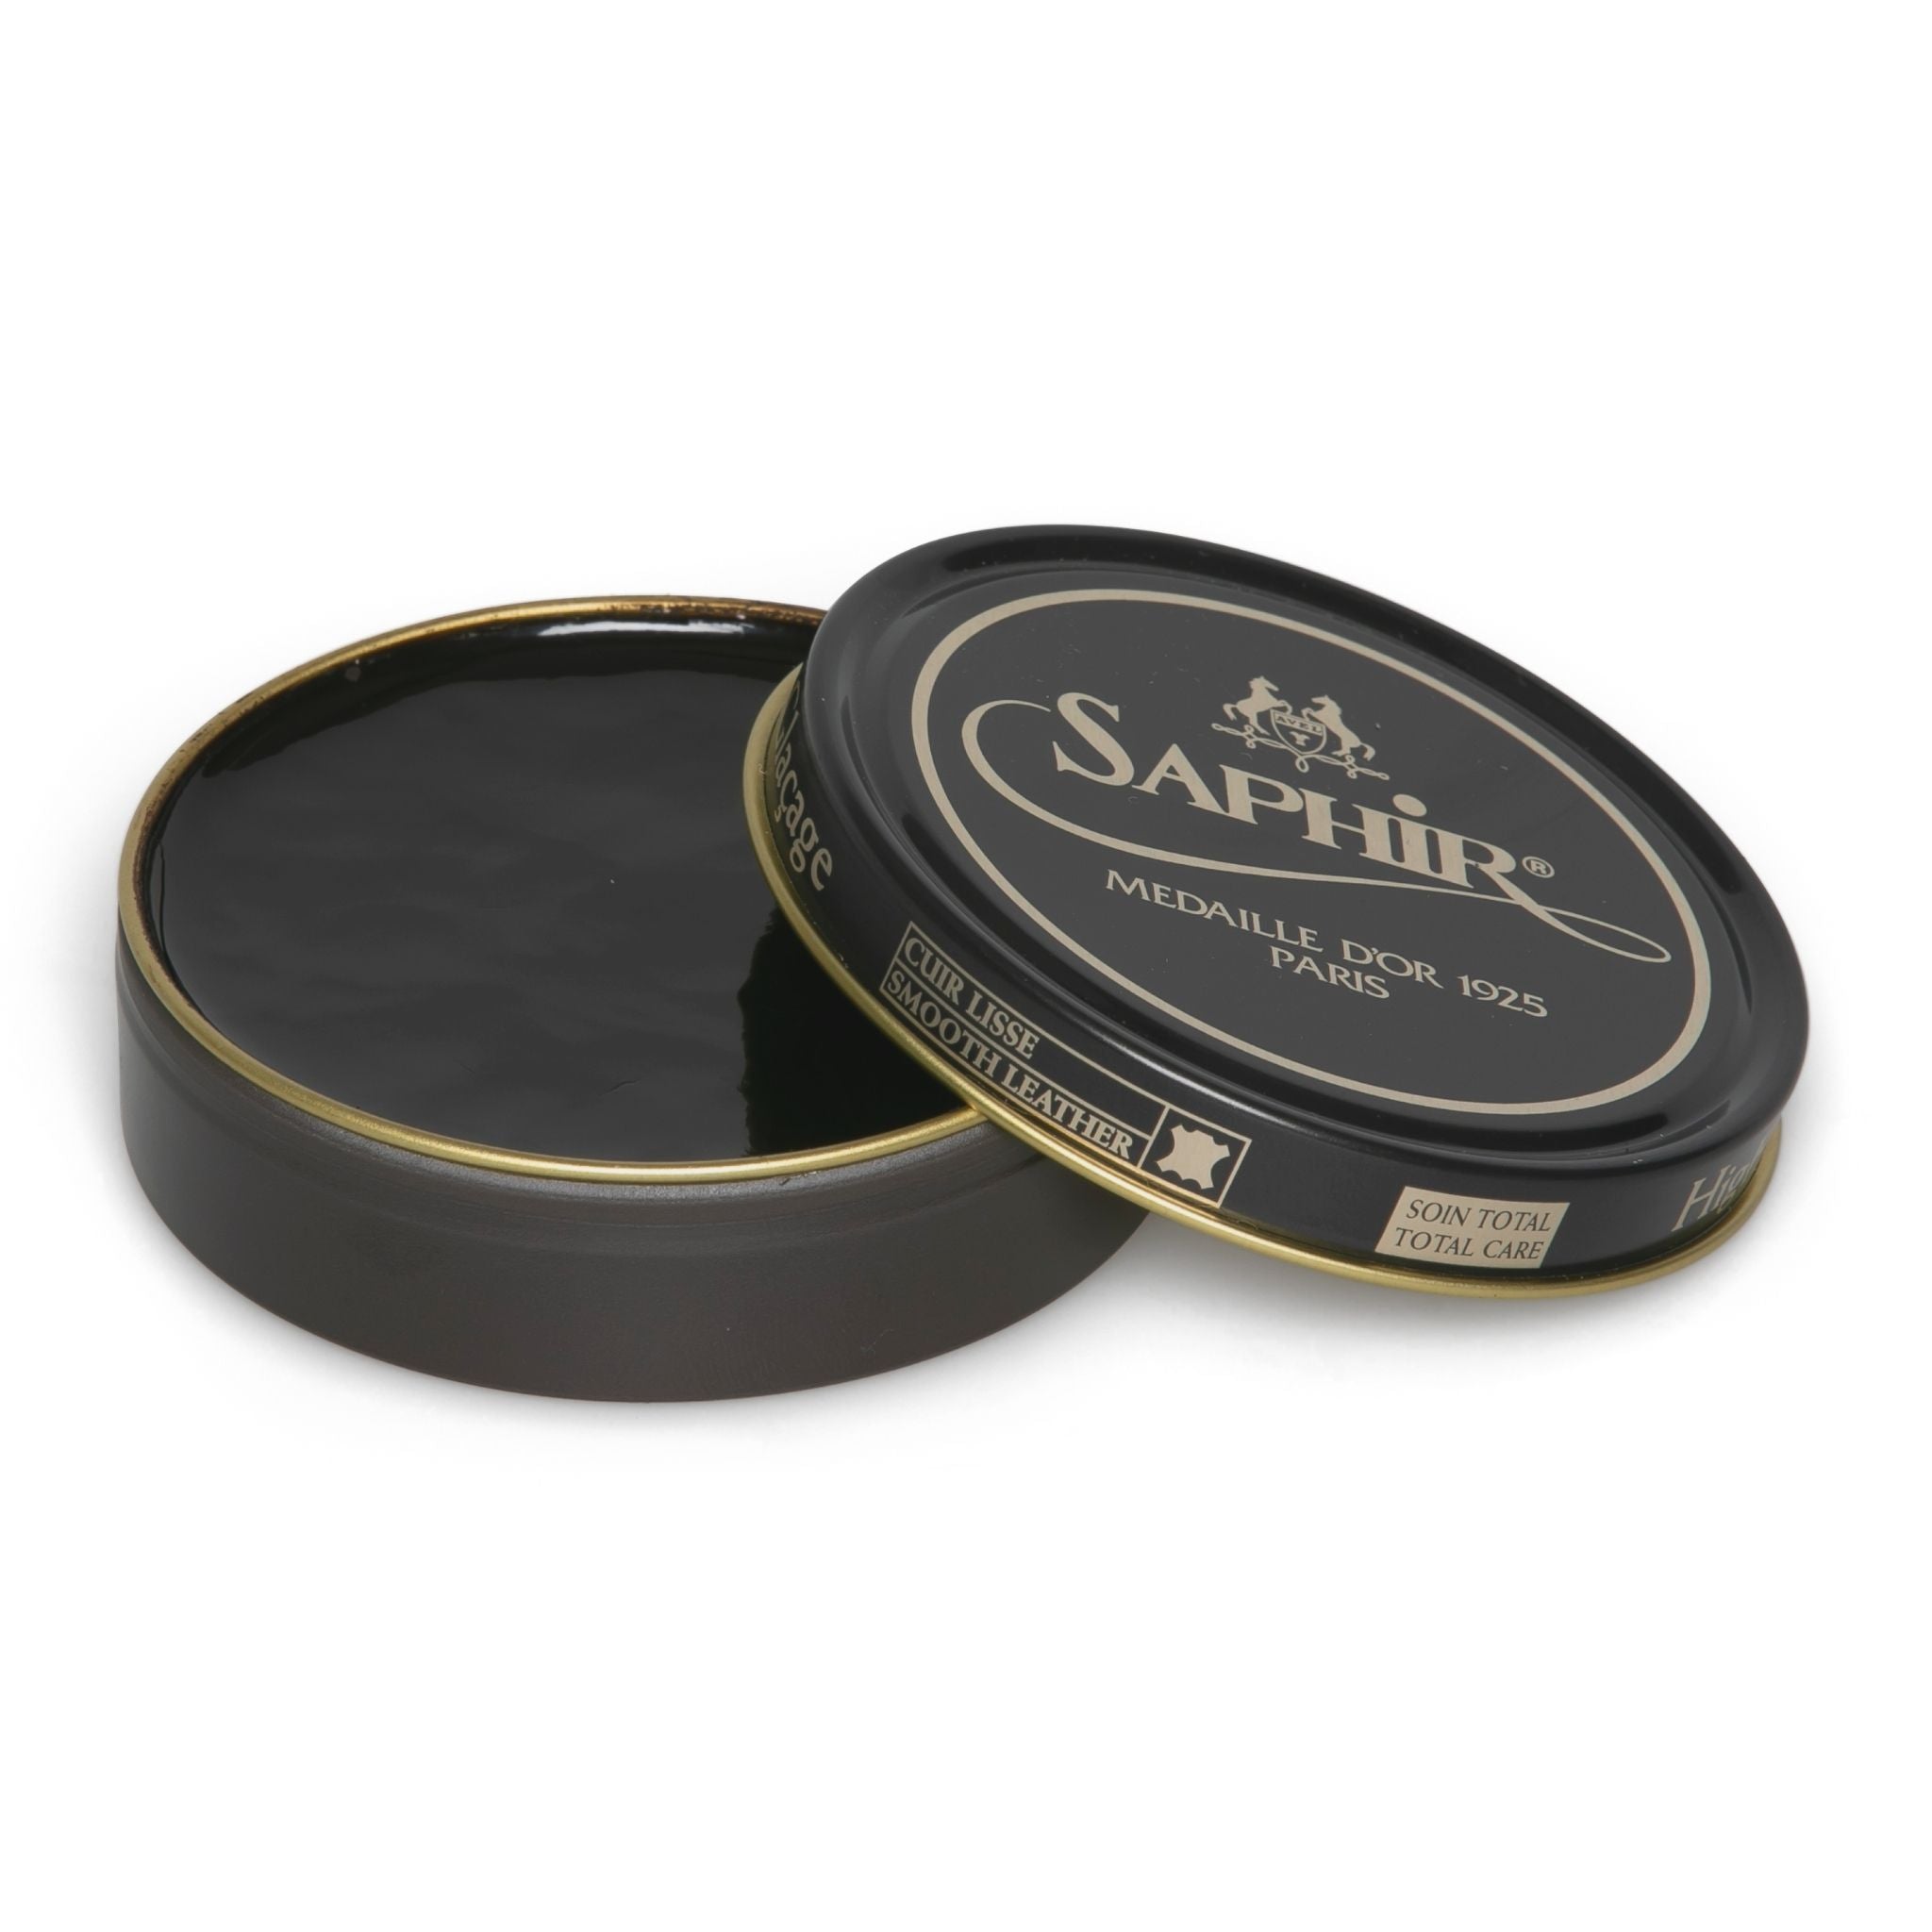 Saphir Pate de Luxe Wax Shoe Polish (100ml) in dark brown colour is the perfect solution to achieve the ultimate shine